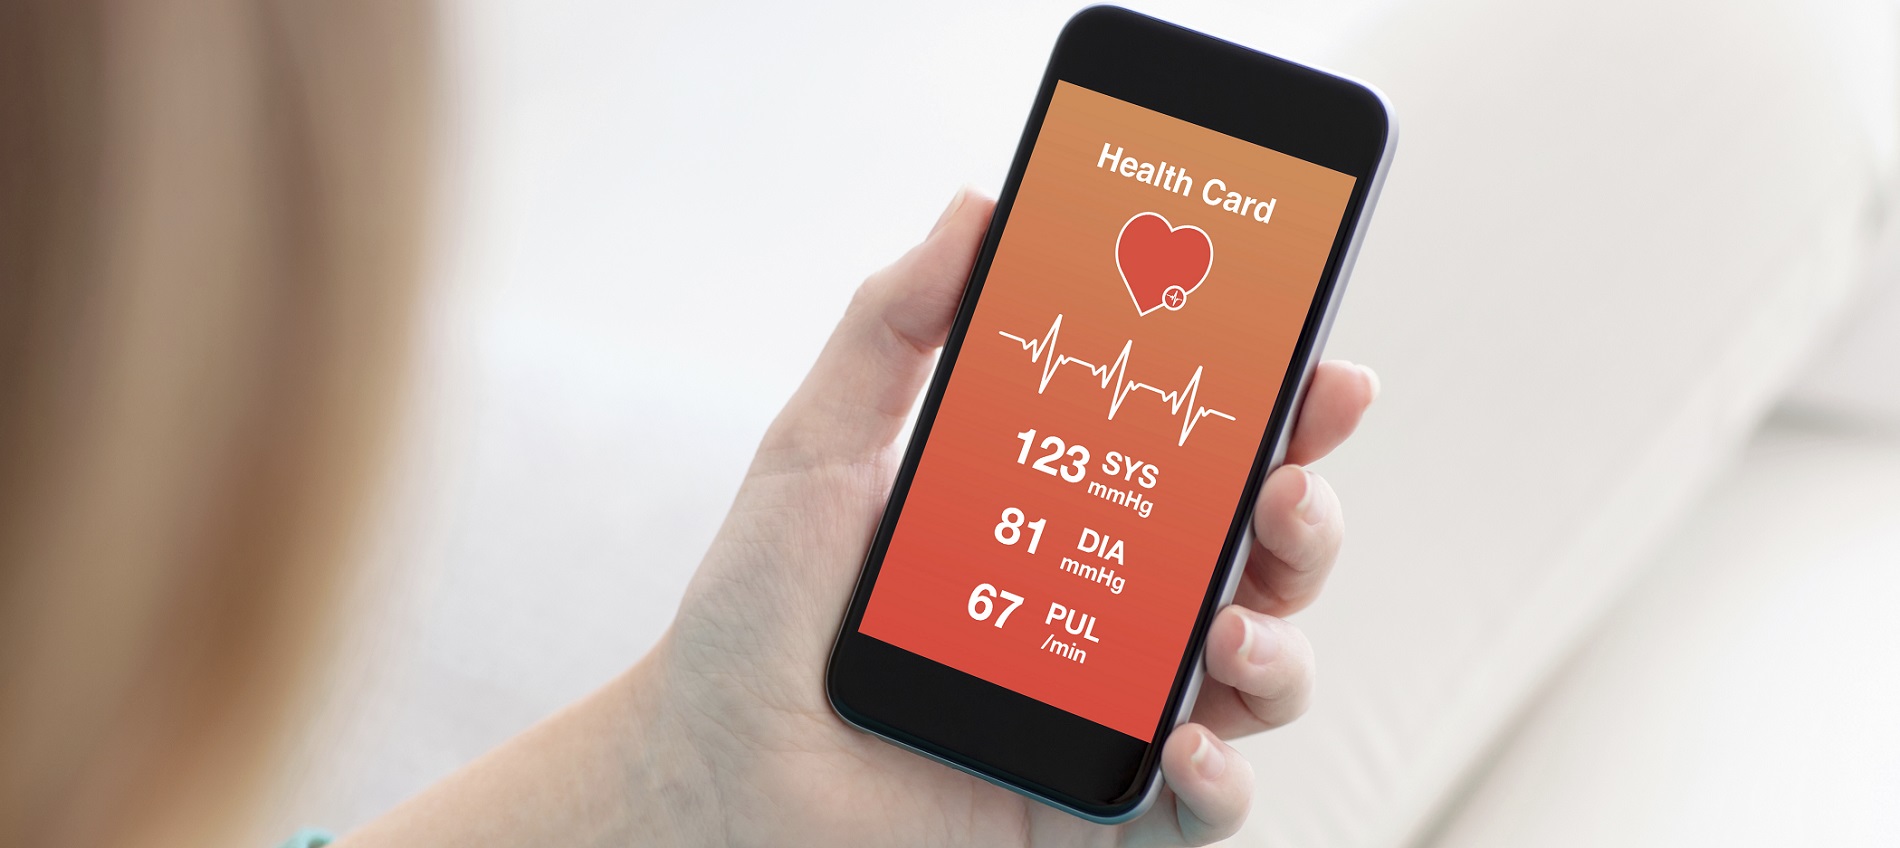 mhealth Applications